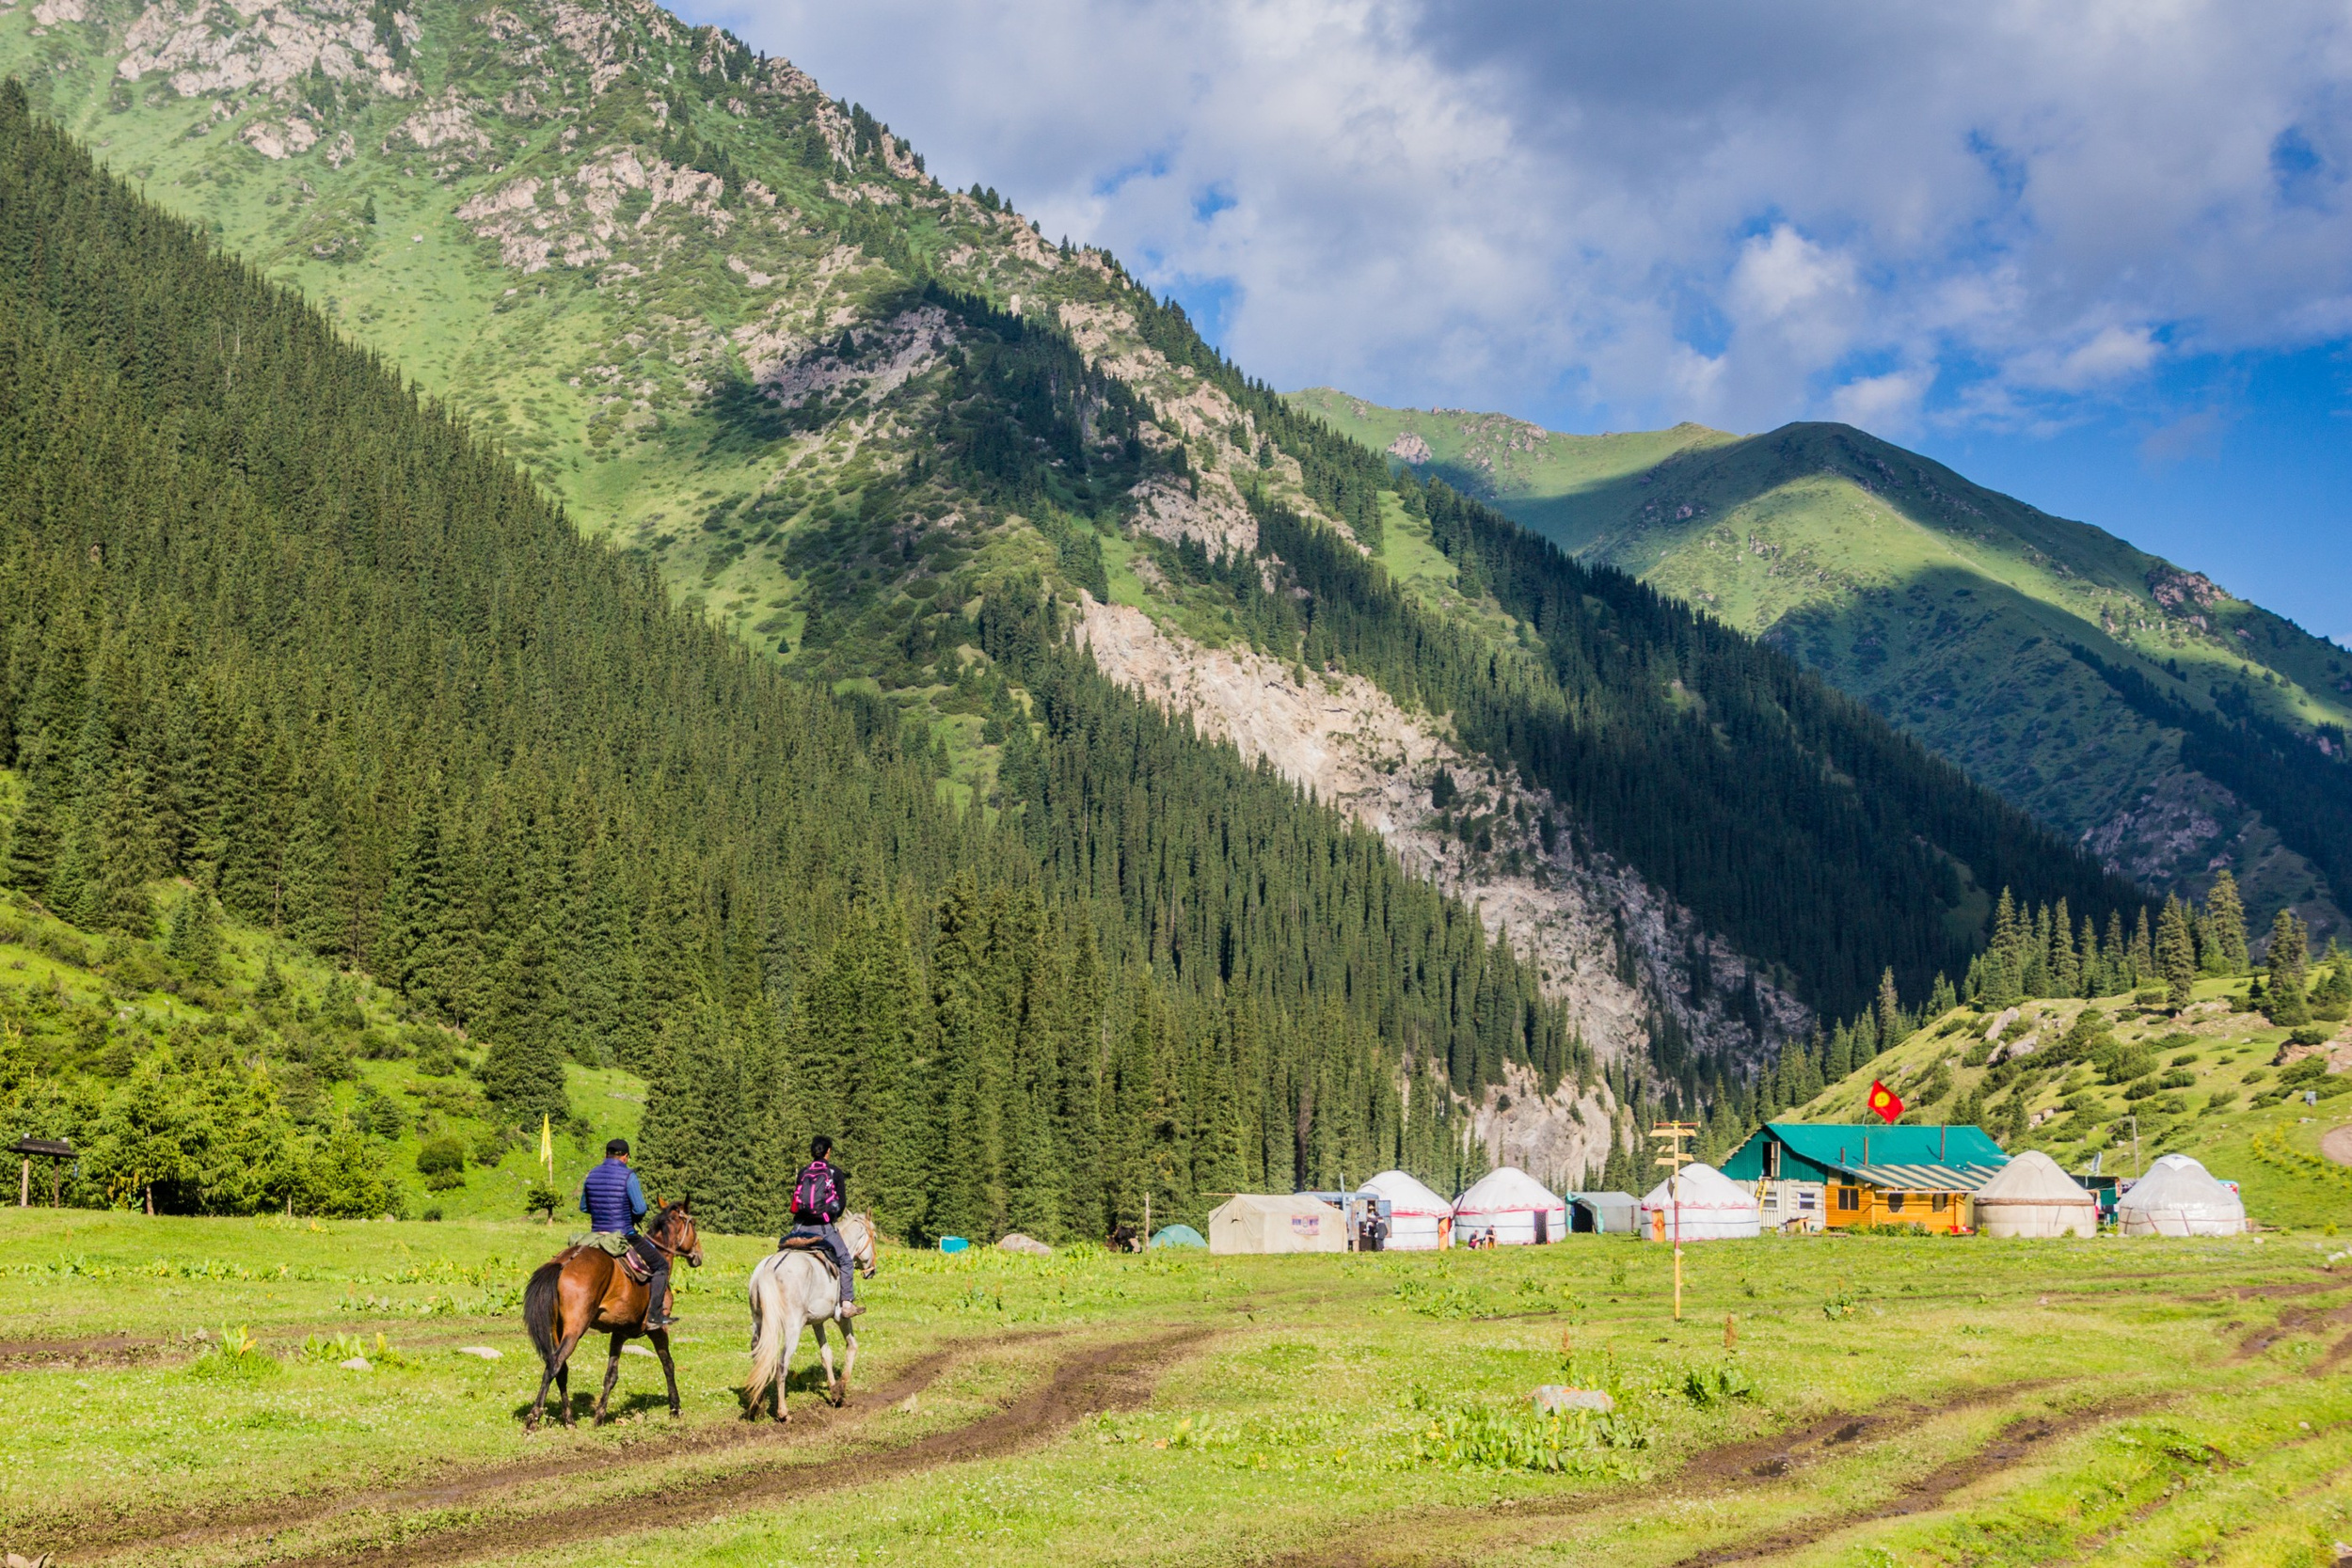 <p>Horse riding is a national pastime in Kyrgyzstan, and visitors are more than welcome to take part in it. Horse treks provide a sample of traditional nomadic life and are a great way to see the country's landscapes.</p><p>You may also like: <a href='https://www.yardbarker.com/lifestyle/articles/25_recipes_that_are_perfect_for_your_picnic_basket/s1__23749891'>25 recipes that are perfect for your picnic basket</a></p>